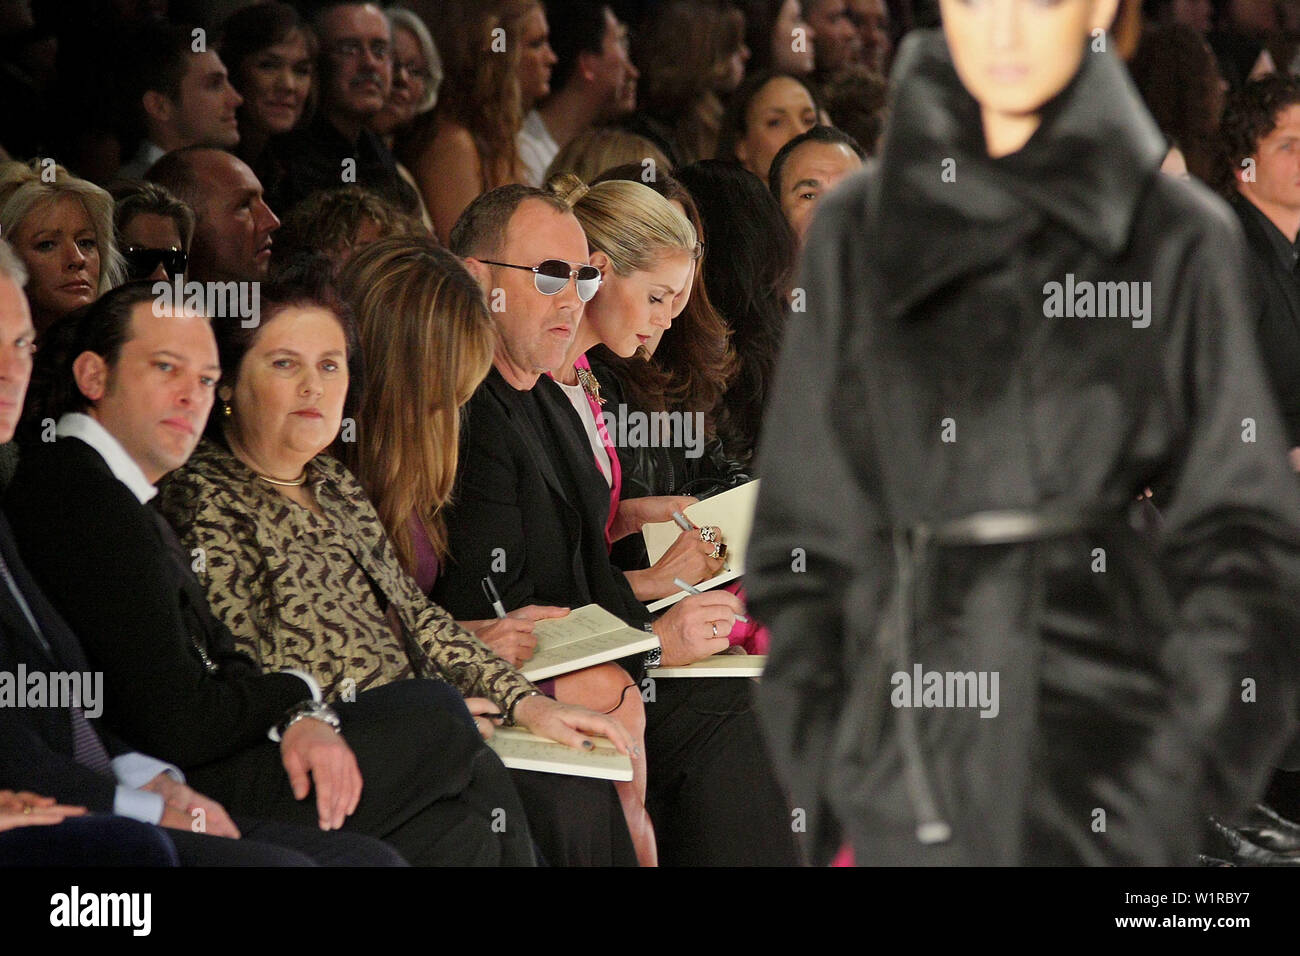 New York, USA. 20 February, 2009. TV personalitie, Michael Kors at the PROJECT RUNWAY Season 6 finale at Mercedes-Benz Fashion Week Fall 2009 at The Promenade in Bryant Park. Credit: Steve Mack/Alamy Stock Photo